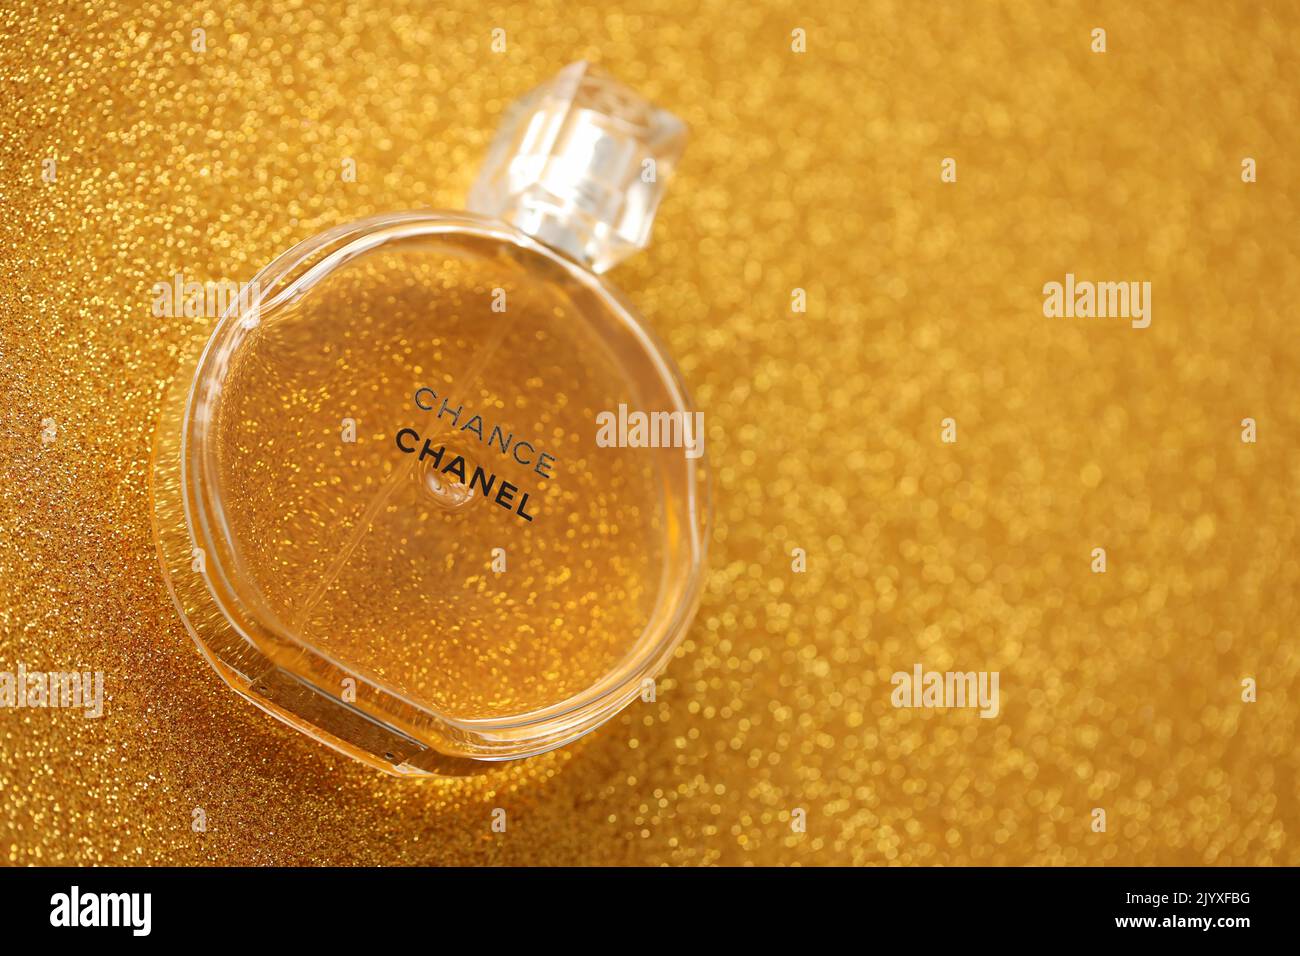 TERNOPIL, UKRAINE - SEPTEMBER 2, 2022 Chanel Chance worldwide famous french perfume bottle on shiny glitter background in golden and yellow colors Stock Photo